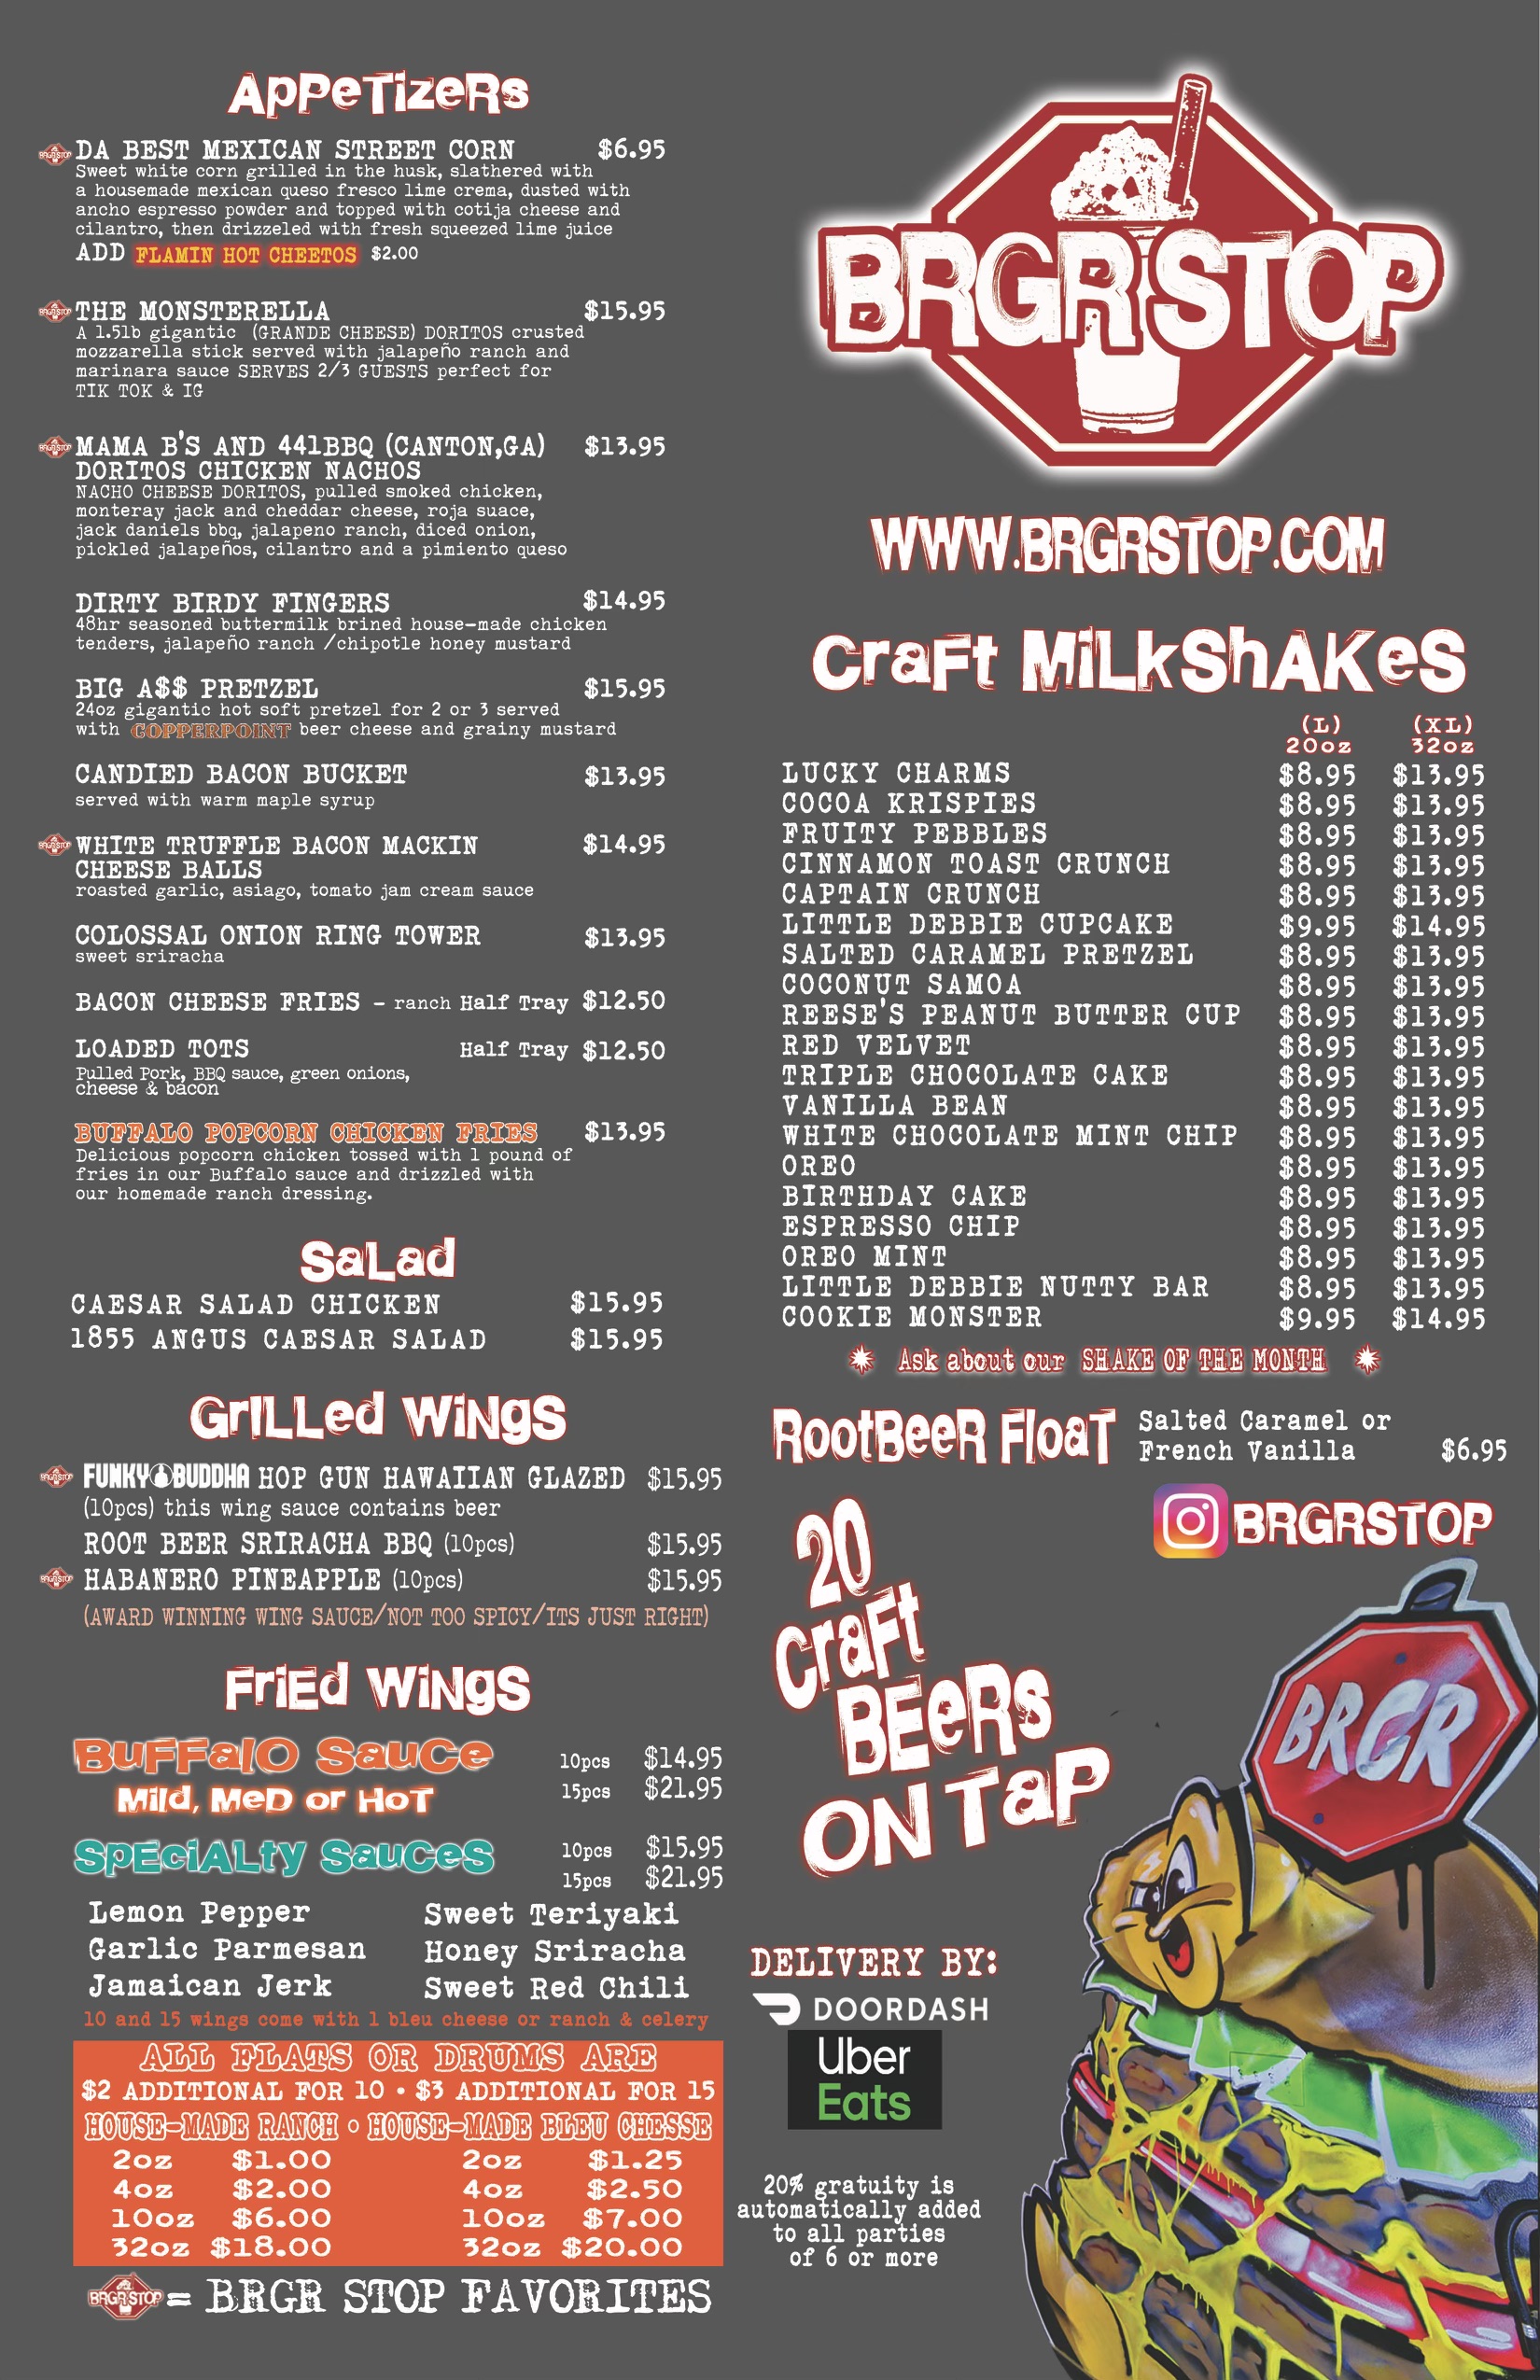 Front and back of a menu from BRGRSTOP, featuring various categories of food such as appetizers, salads, grilled wings, fried wings, and craft burgers, along with information on craft beers, milkshakes, and delivery services